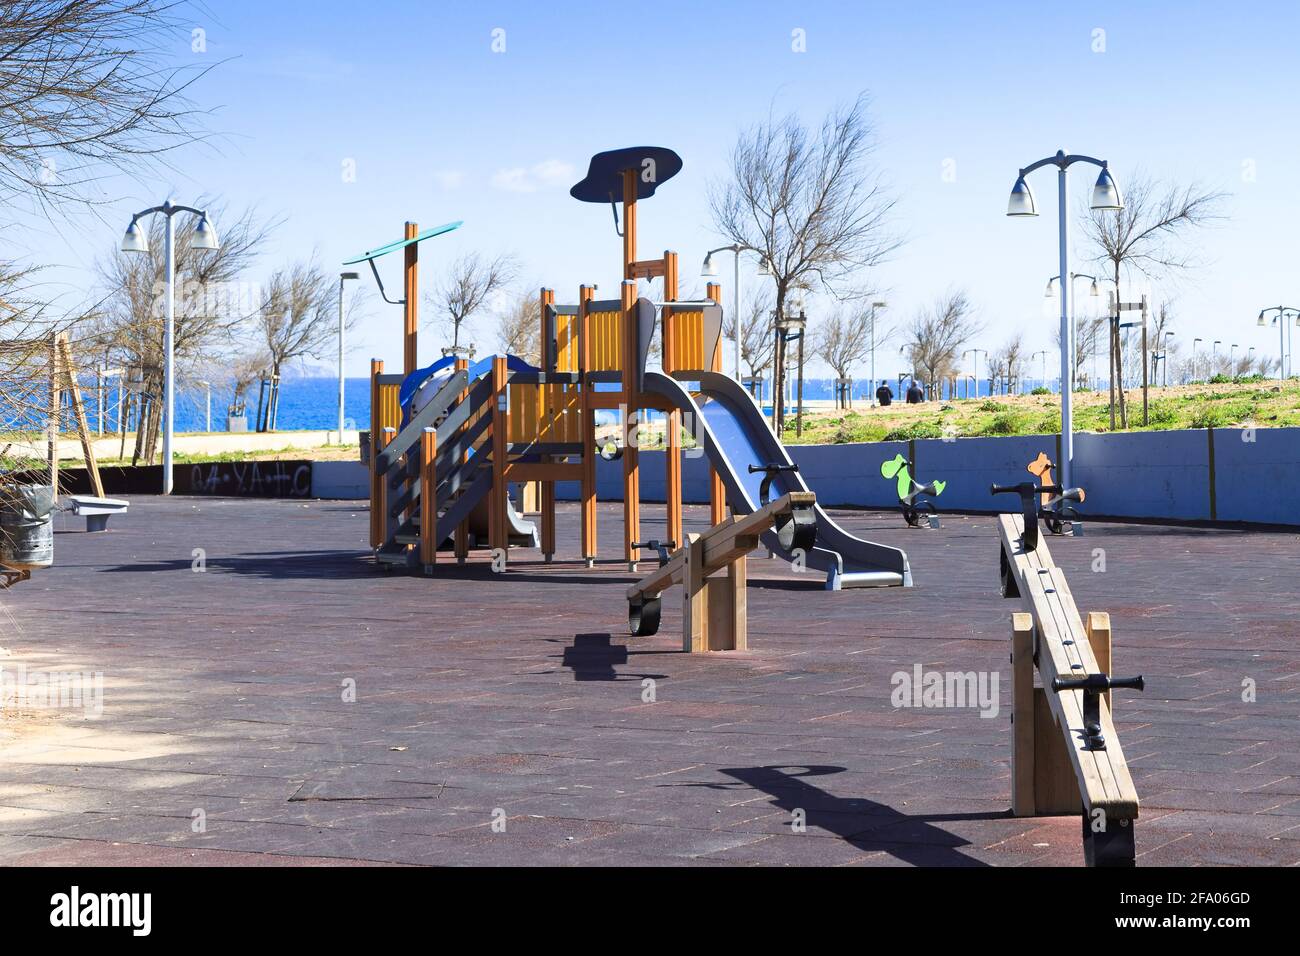 Wooden playground recreation area for children at seaside public park. Safe wooden recreational playground for young children at seaside public park Stock Photo